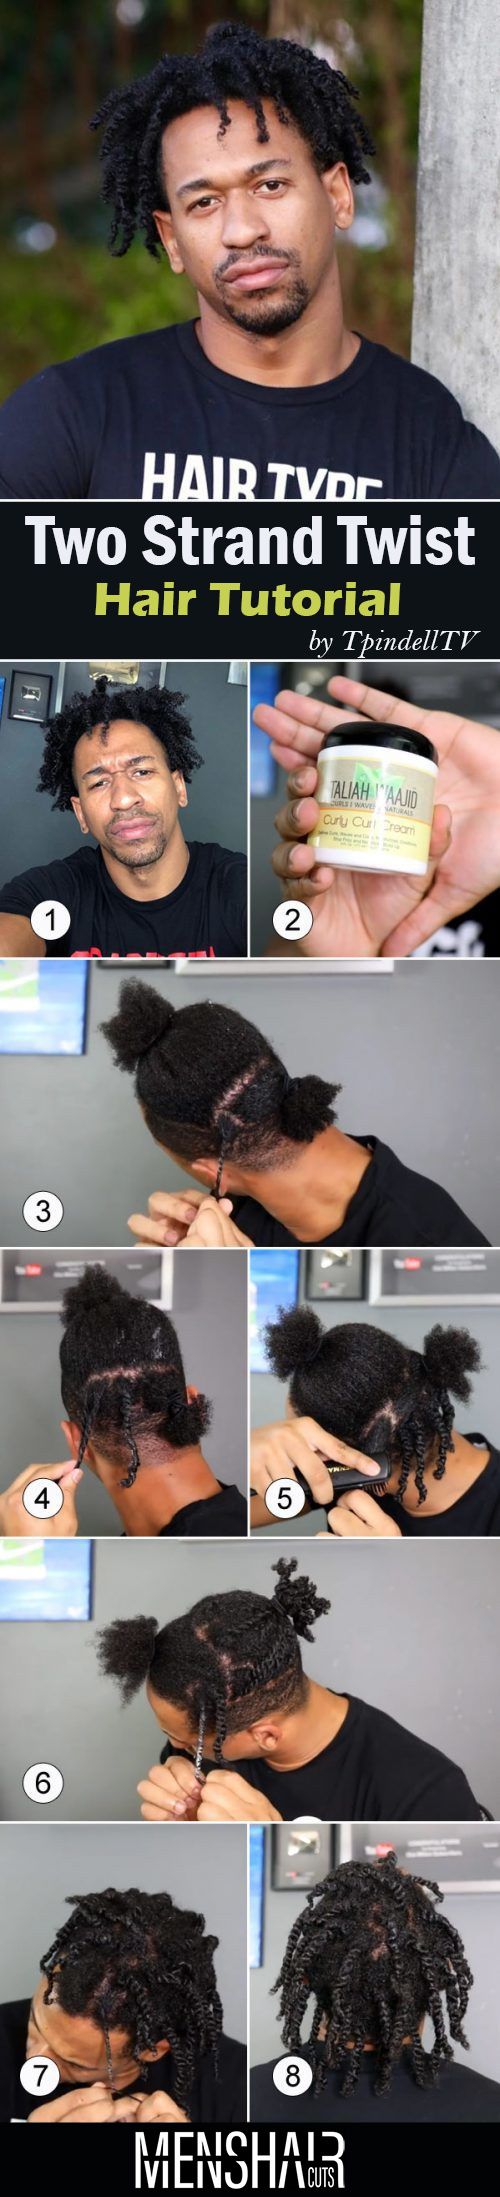 A Step By Step Guide To Twisting Your Hair #twist #twistedhair #twisthair #twistedhairmen